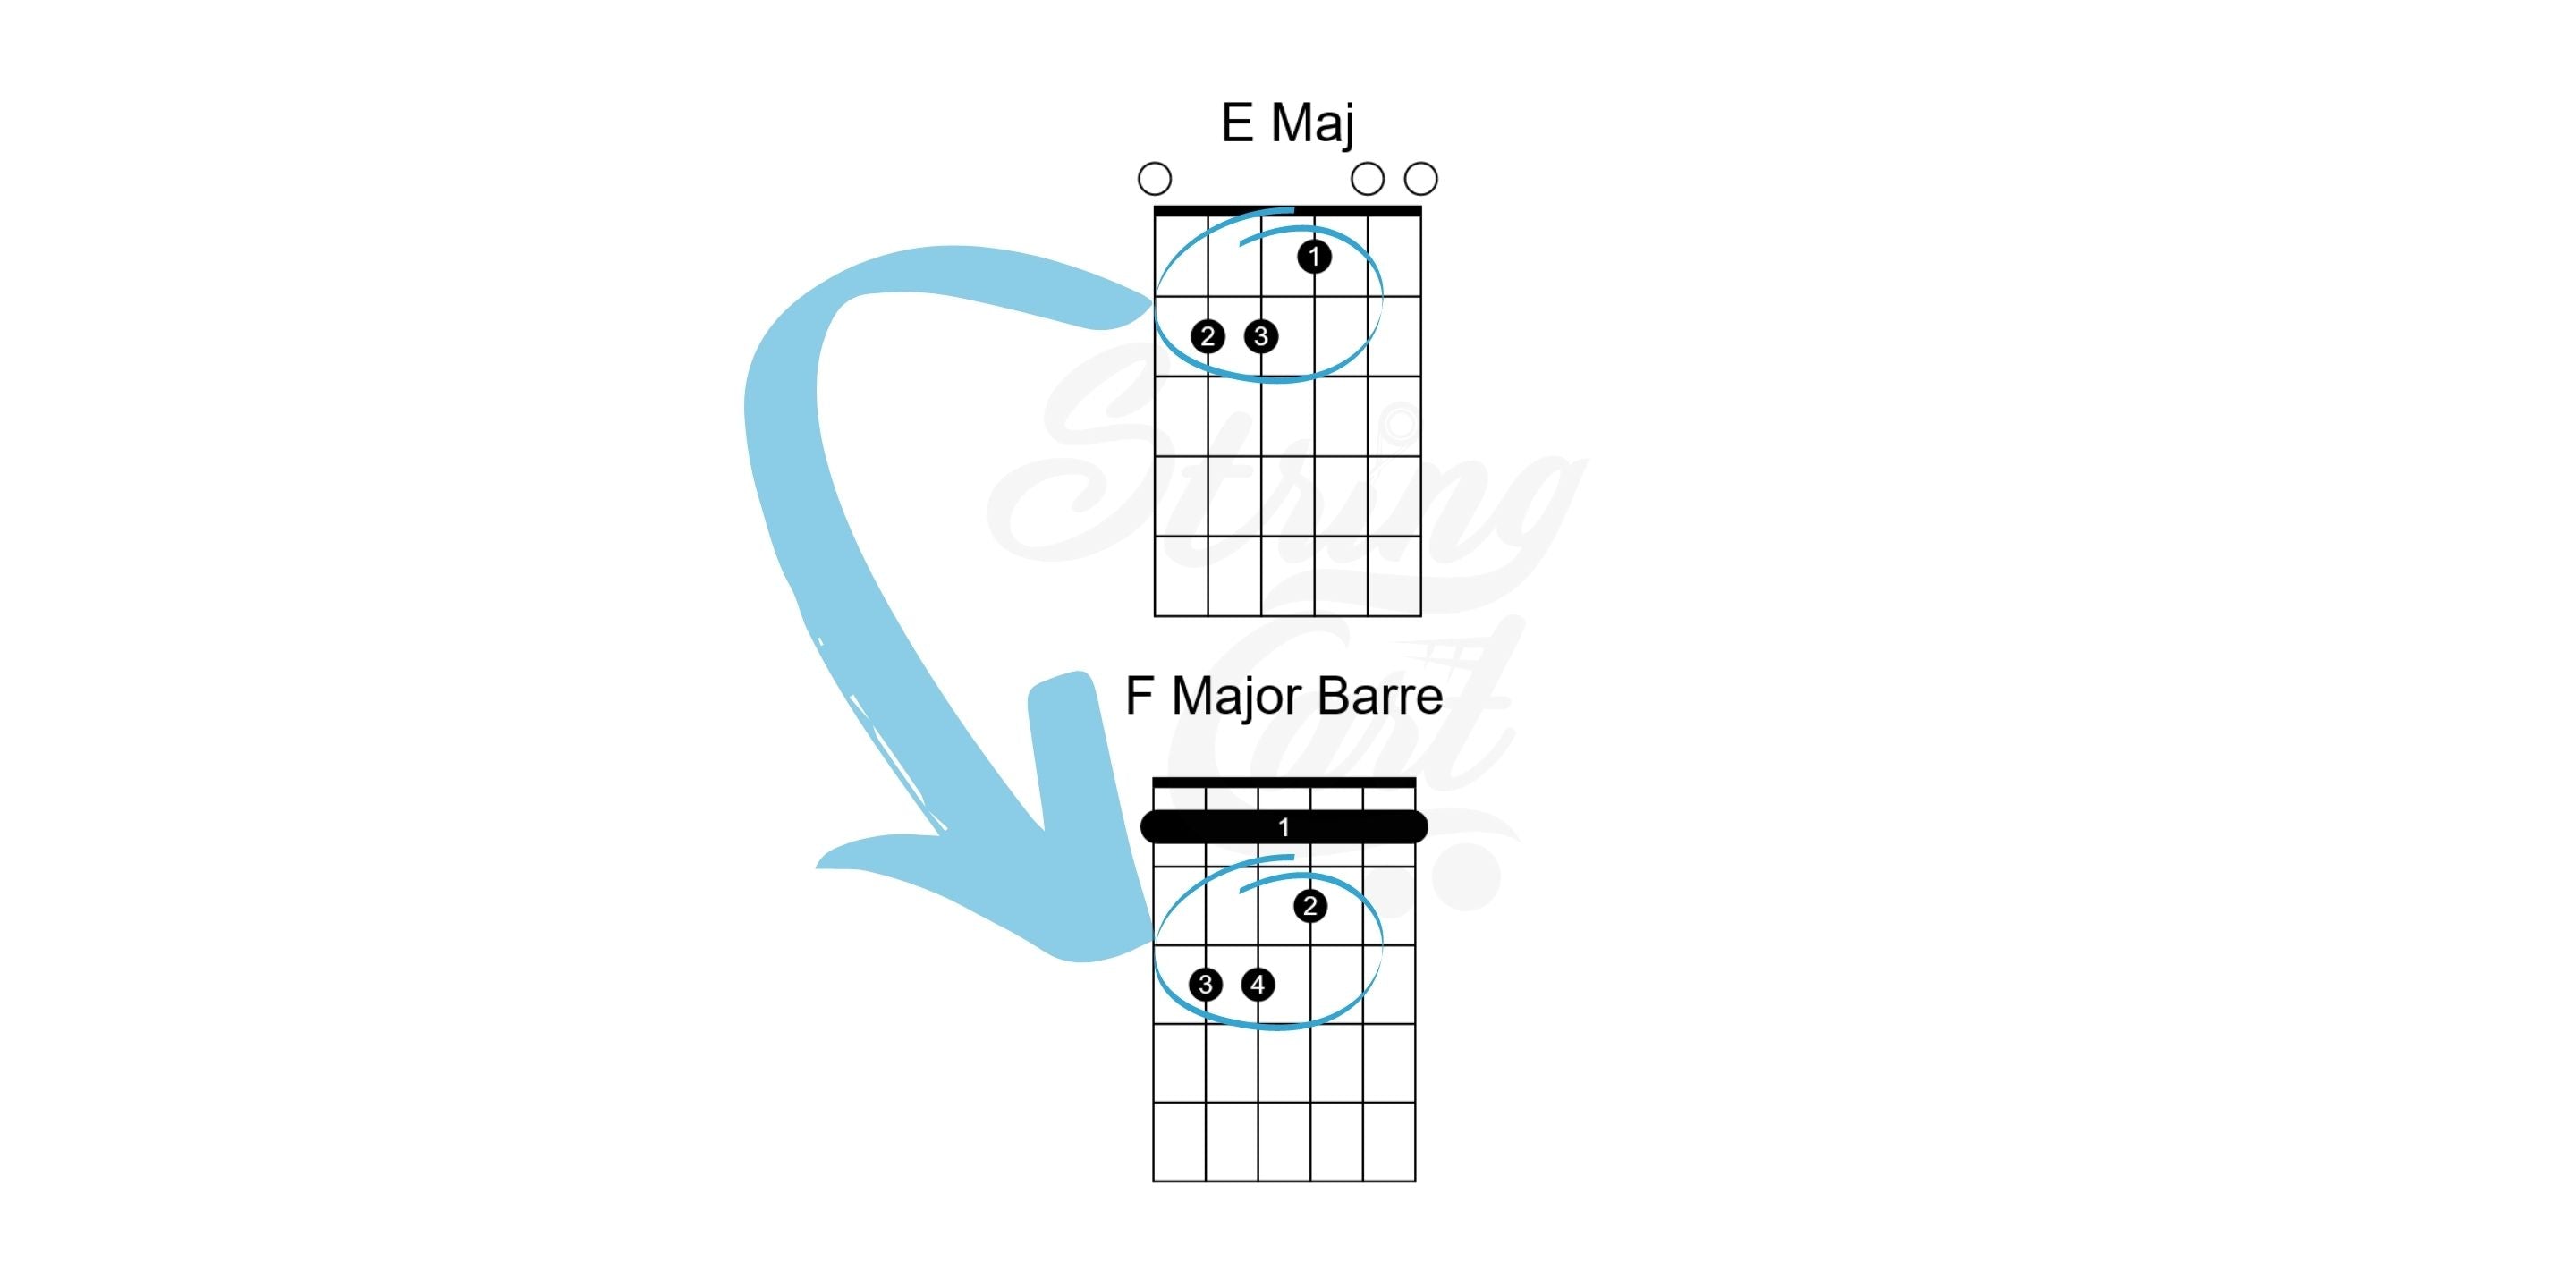 How F Major Barre Chord is Played Using E Major Shape